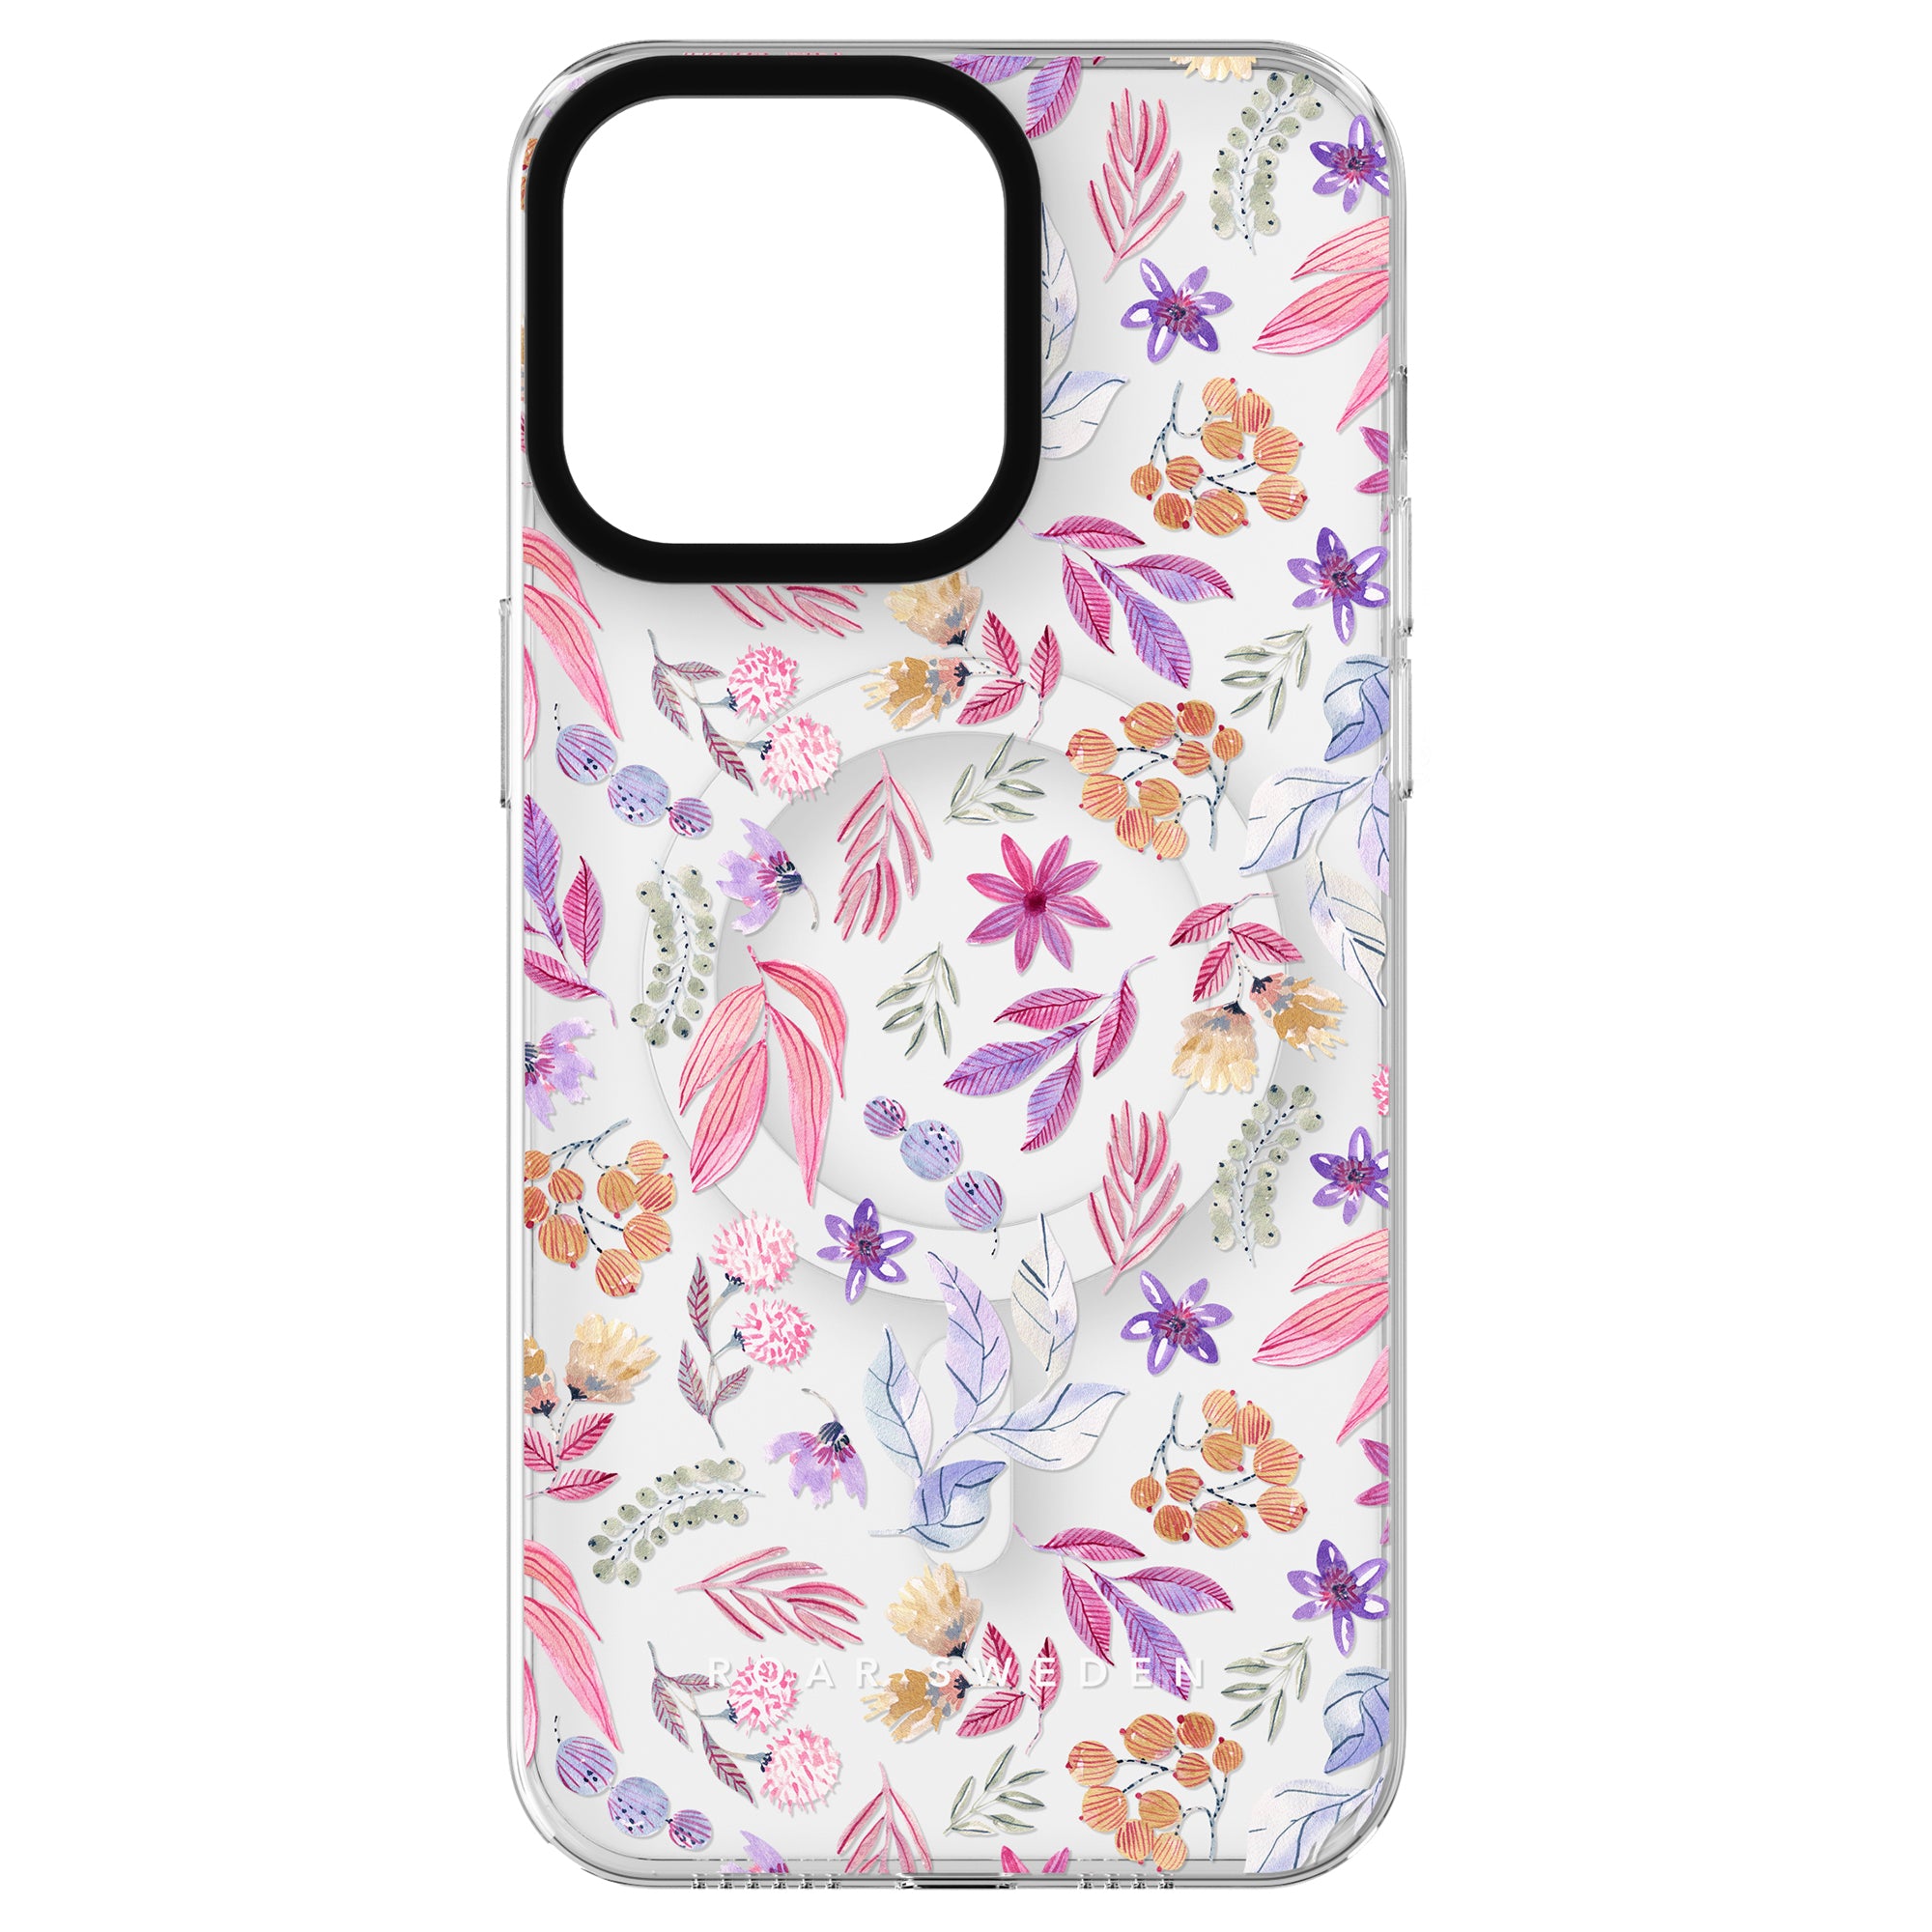 A smartphone case from the Flower Power - MagSafe, featuring a transparent background with a colorful floral pattern of pink, purple, and orange flowers and leaves.